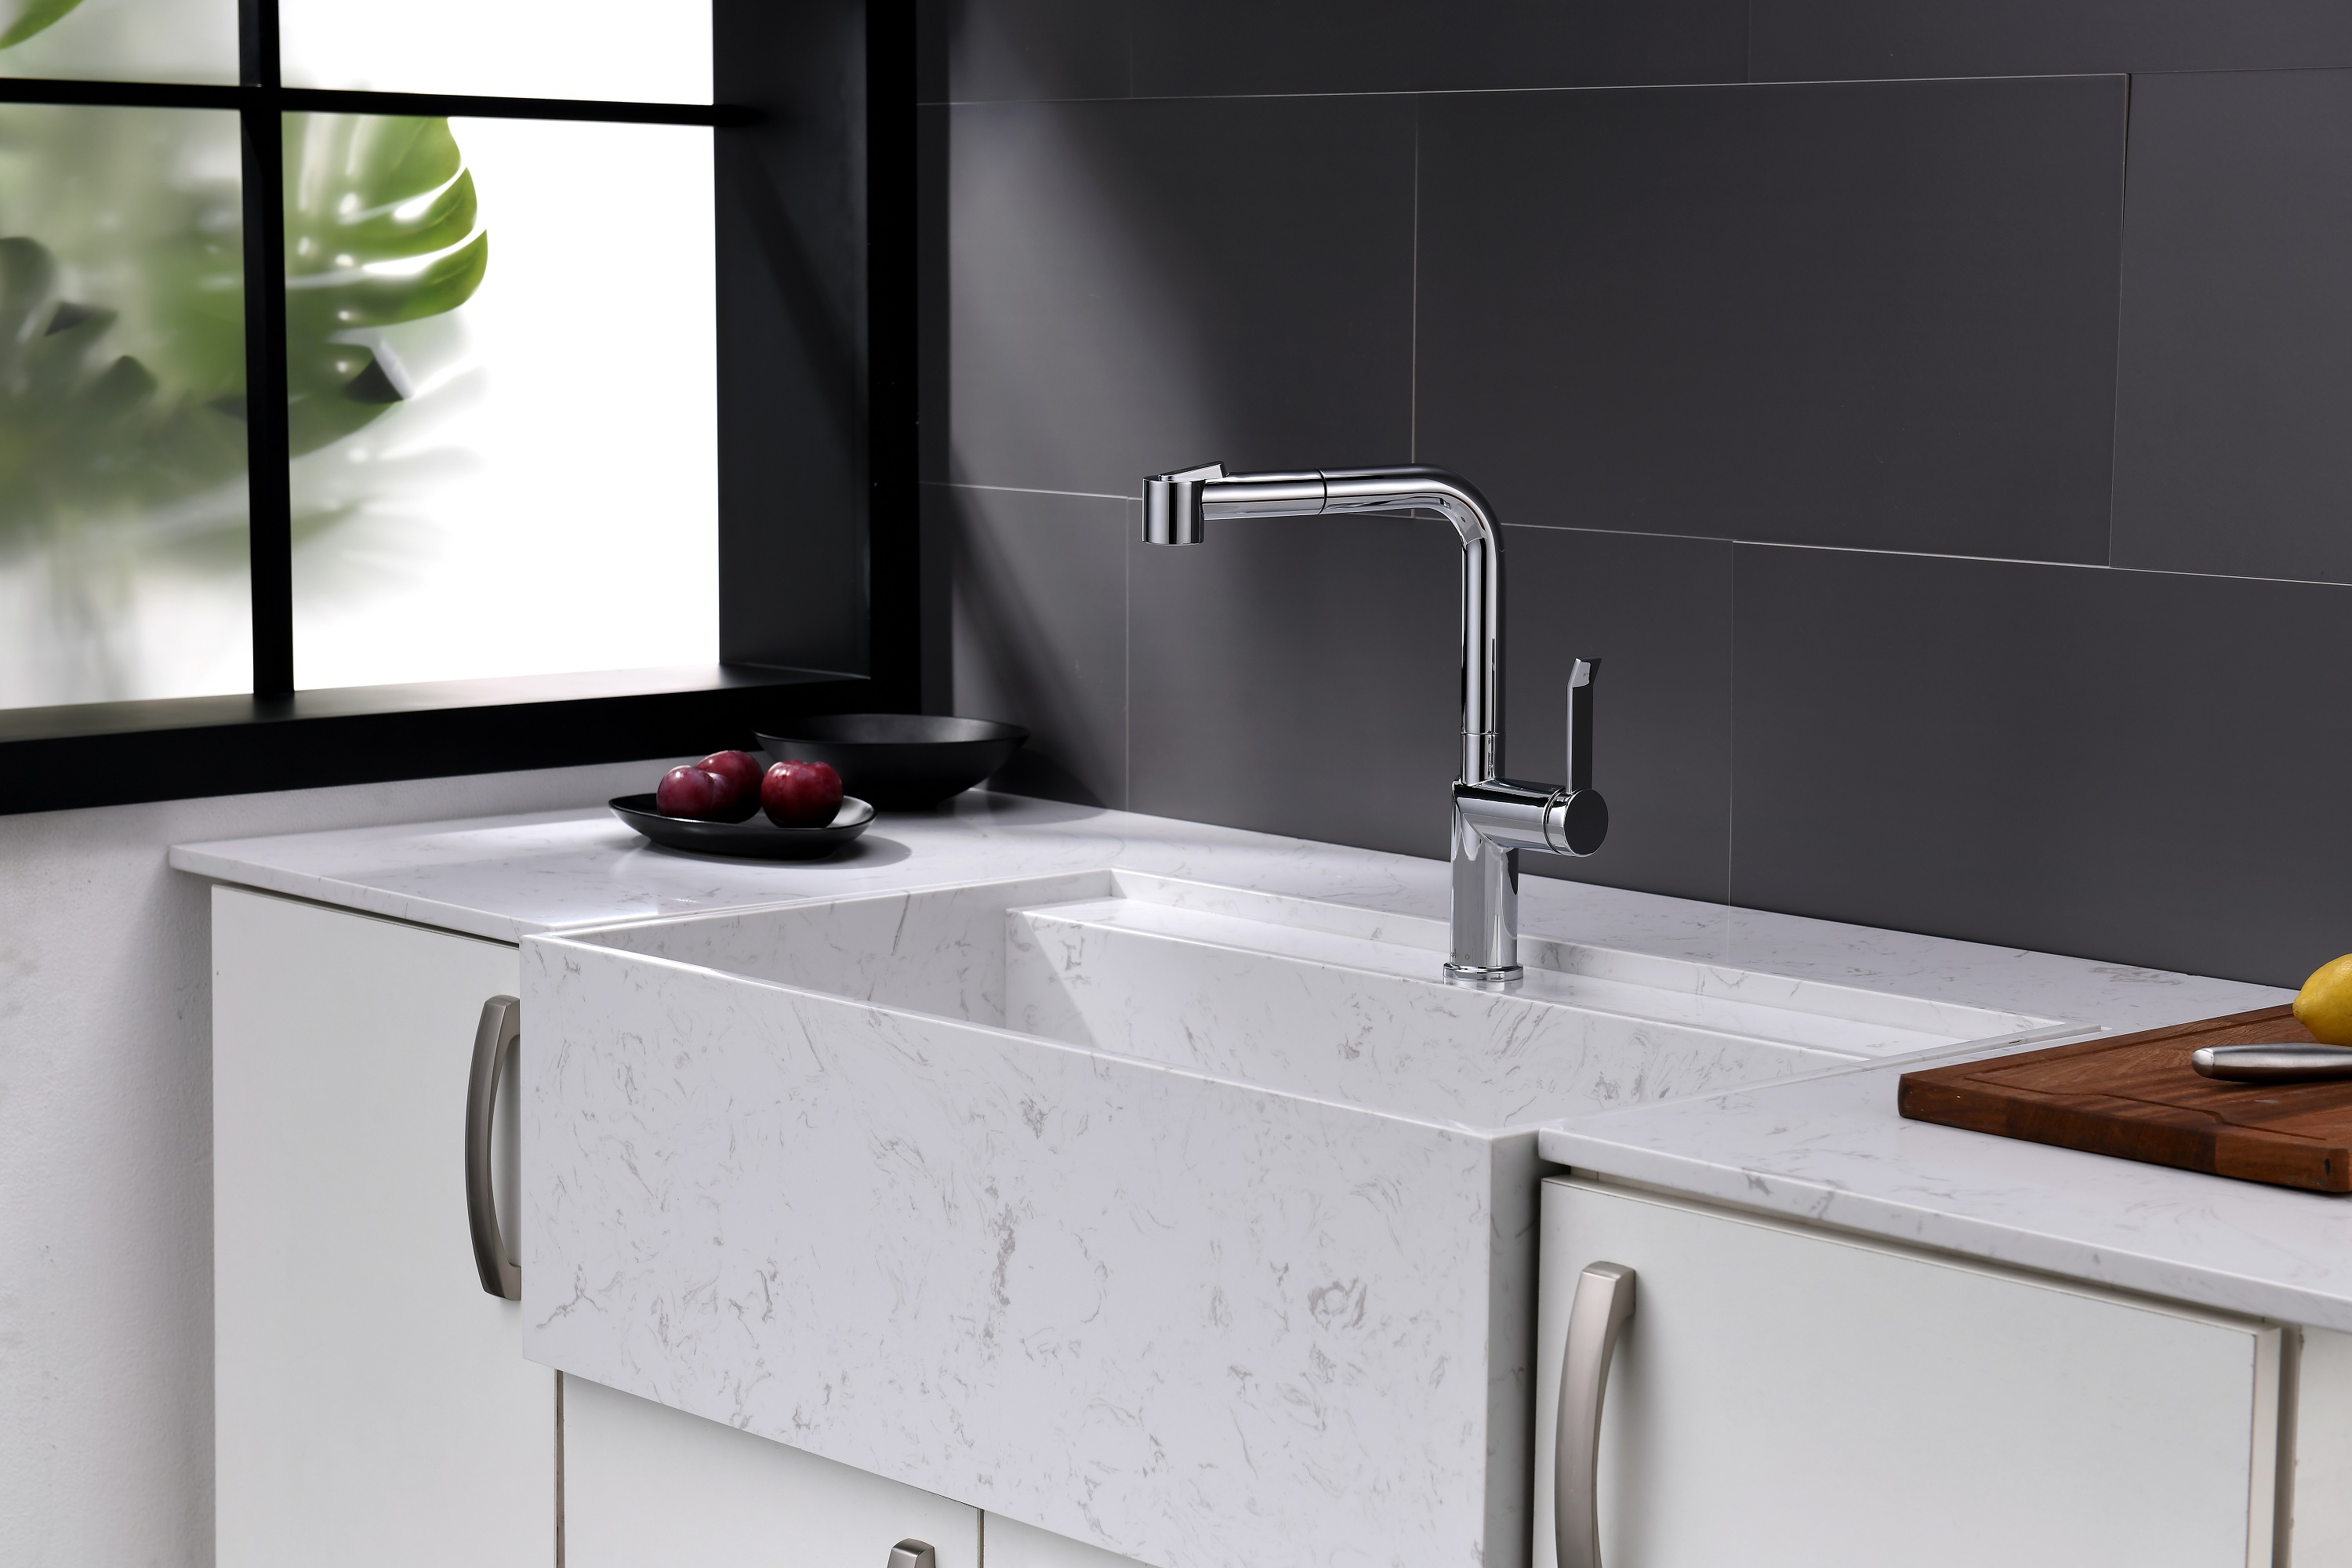 How to Choose a Kitchen Faucet？